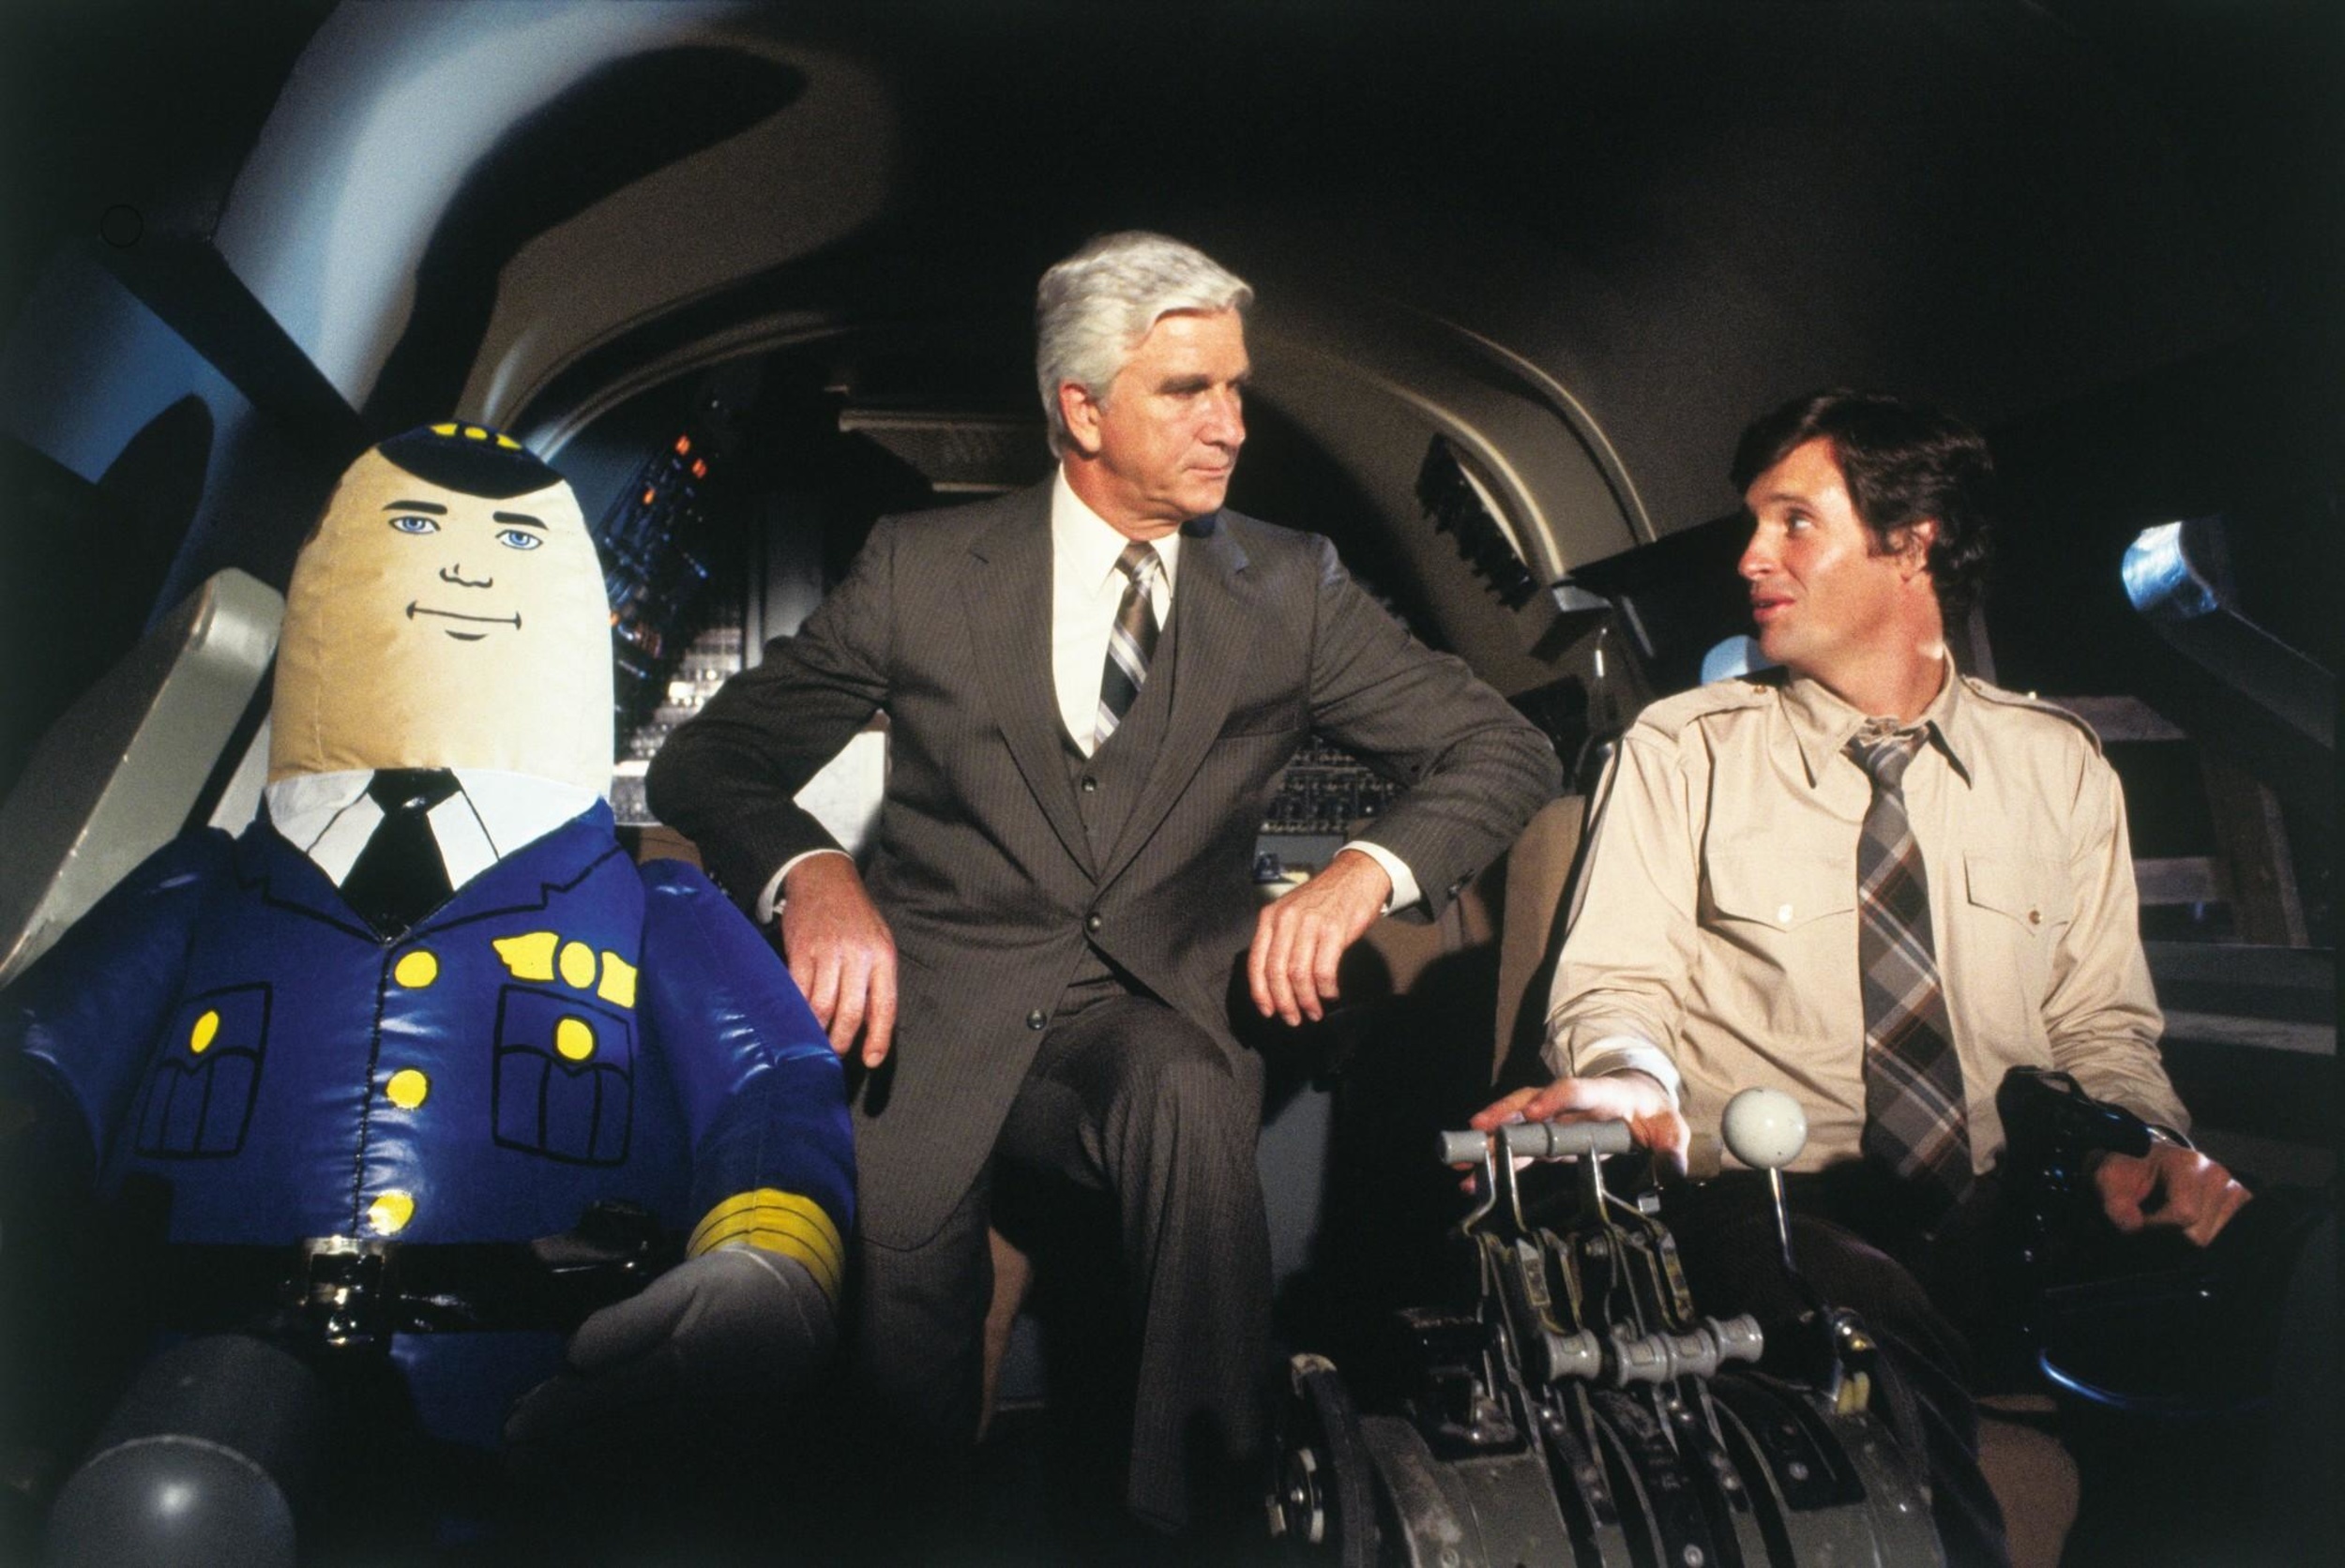 <p>“Airplane!” is beloved by fans of all-out joke factories masquerading as movies. There is a gag a second in this iconic comedy. The film is a parody of movies like “Airport” and “Zero Hour” that were popular in the ‘70s. Those aren’t really about pilots necessarily, but Ted Striker, the de facto main character of “Airplane!” is. We’re serious. And don’t call us Shirley.</p><p>You may also like: <a href='https://www.yardbarker.com/entertainment/articles/21_of_country_musics_greatest_voices_031924/s1__38994195'>21 of country music's greatest voices</a></p>